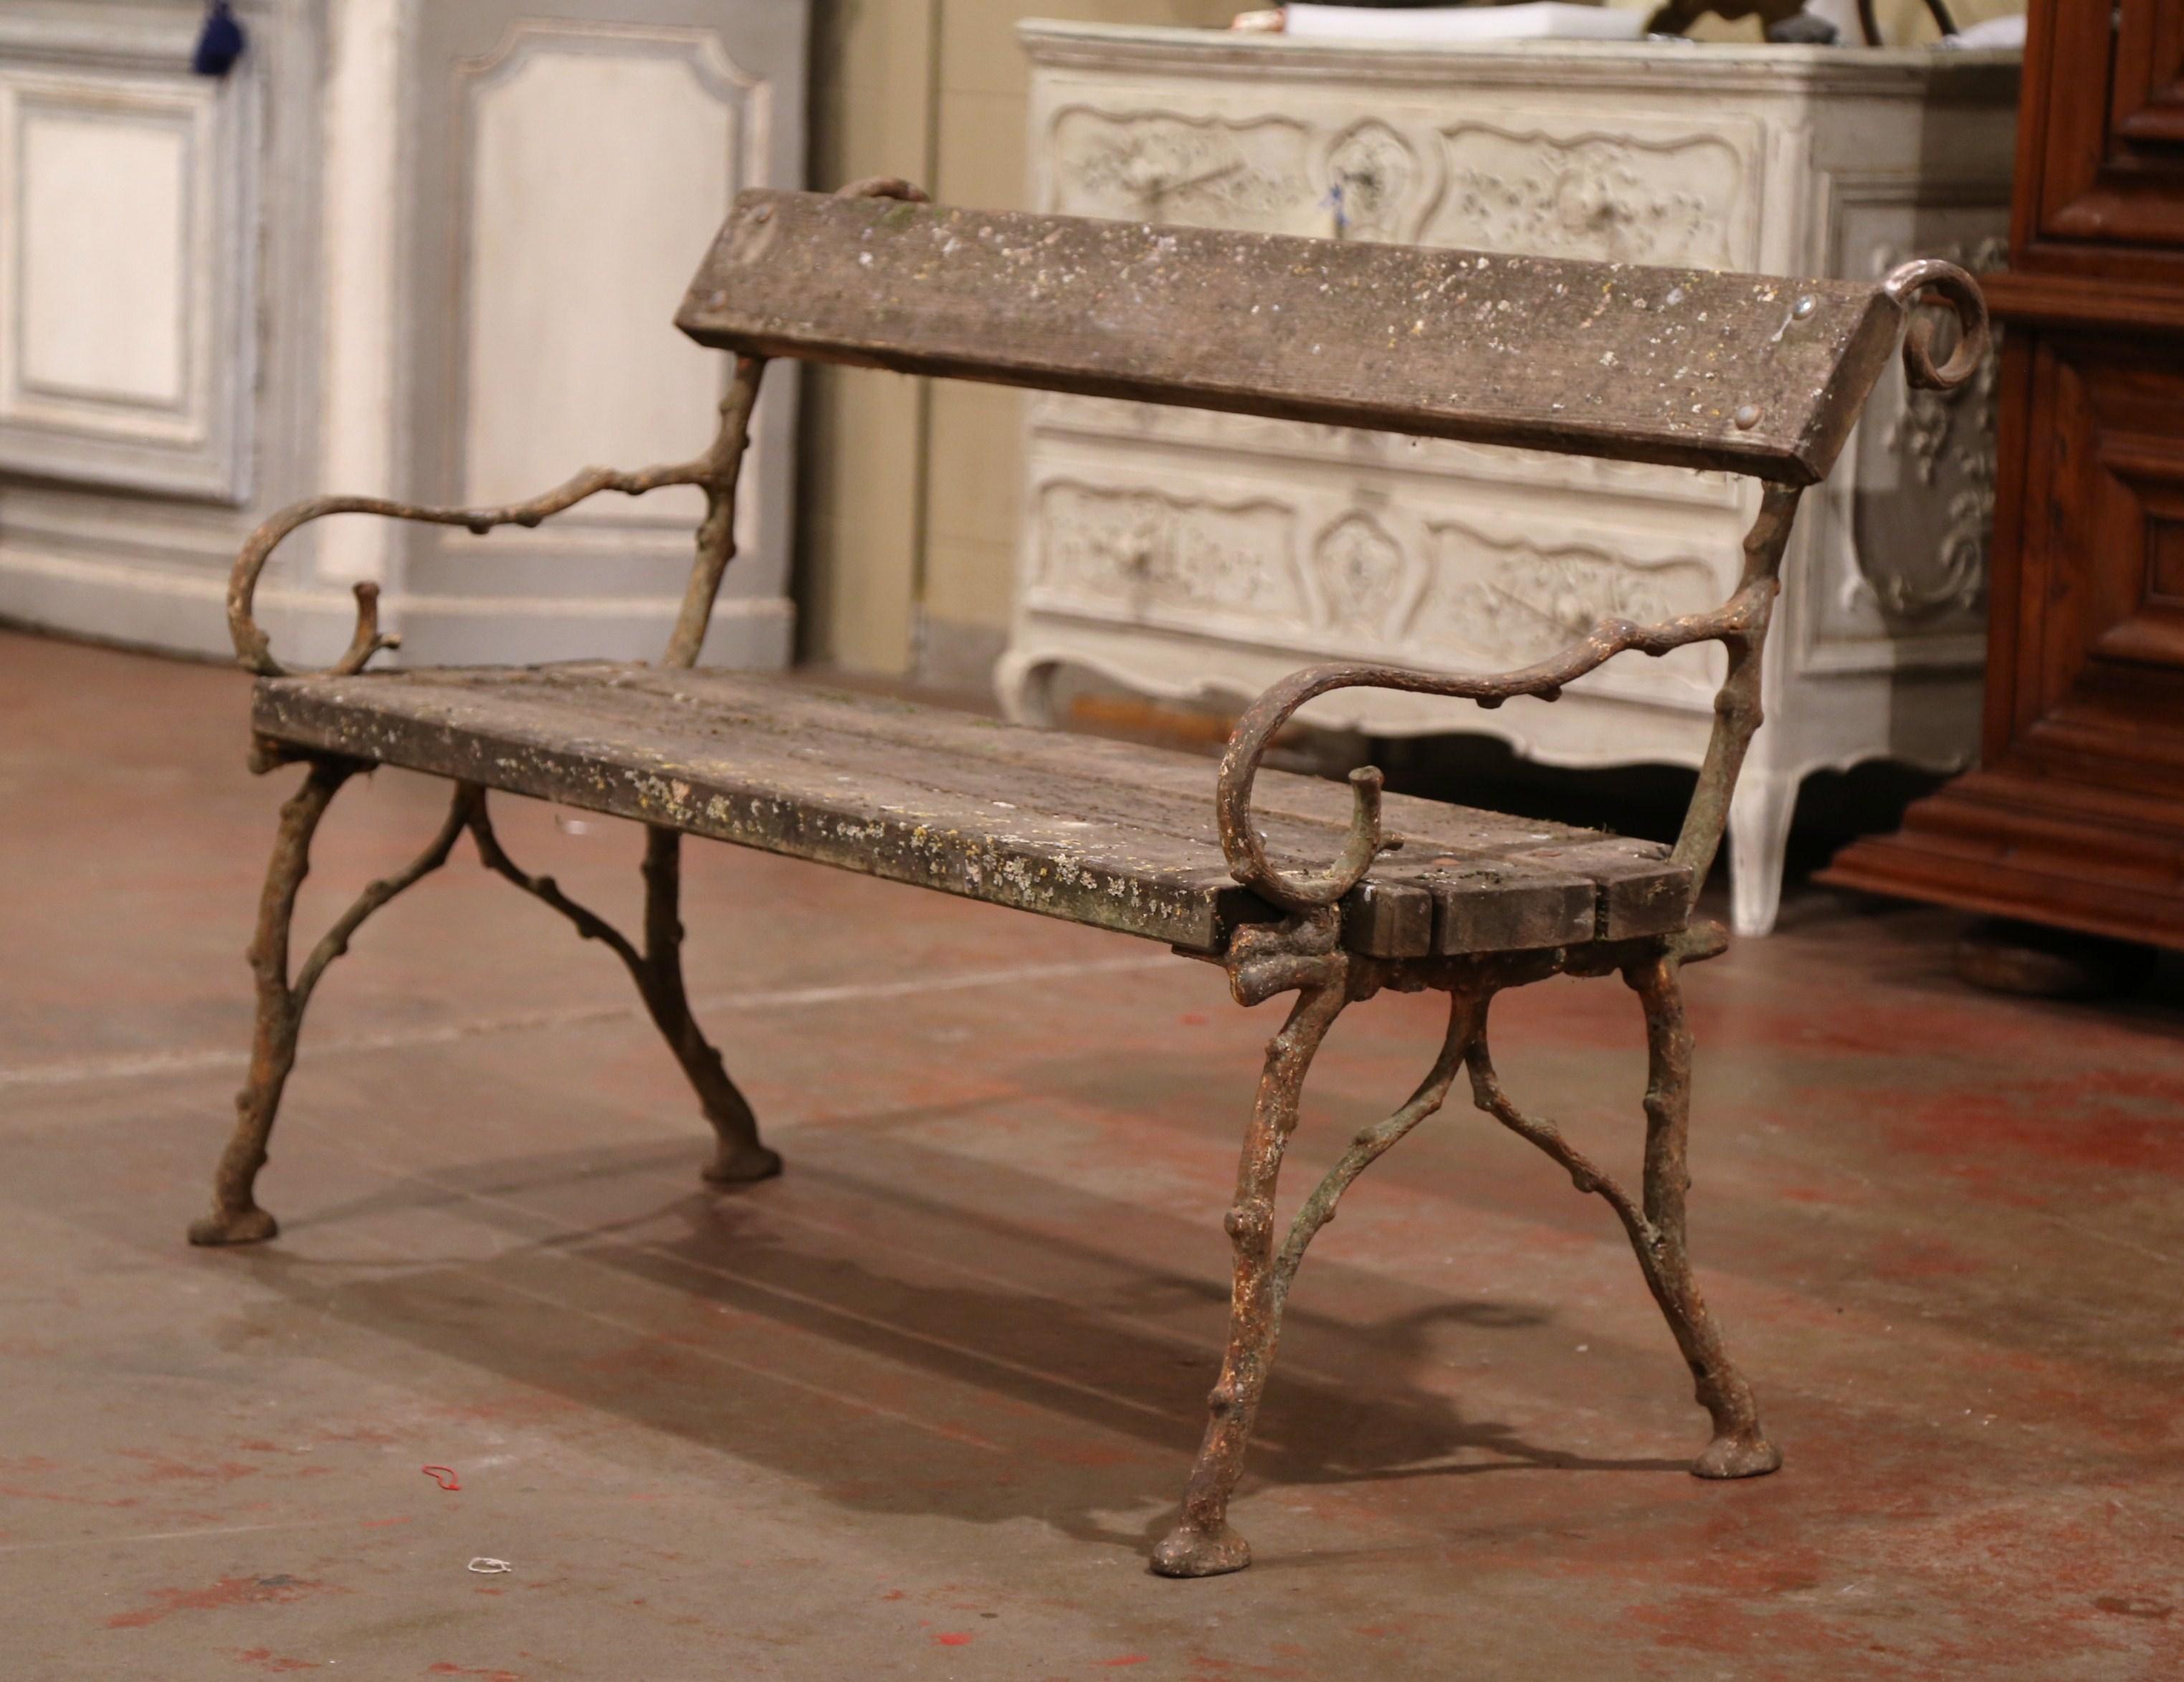 This wonderful antique bench was found in a Normandy manor, crafted circa 1860 and made of iron shaped as tree branches, and oak planks, the bench adorns the original weathered finish which was left as authentic as it was. The seating is in